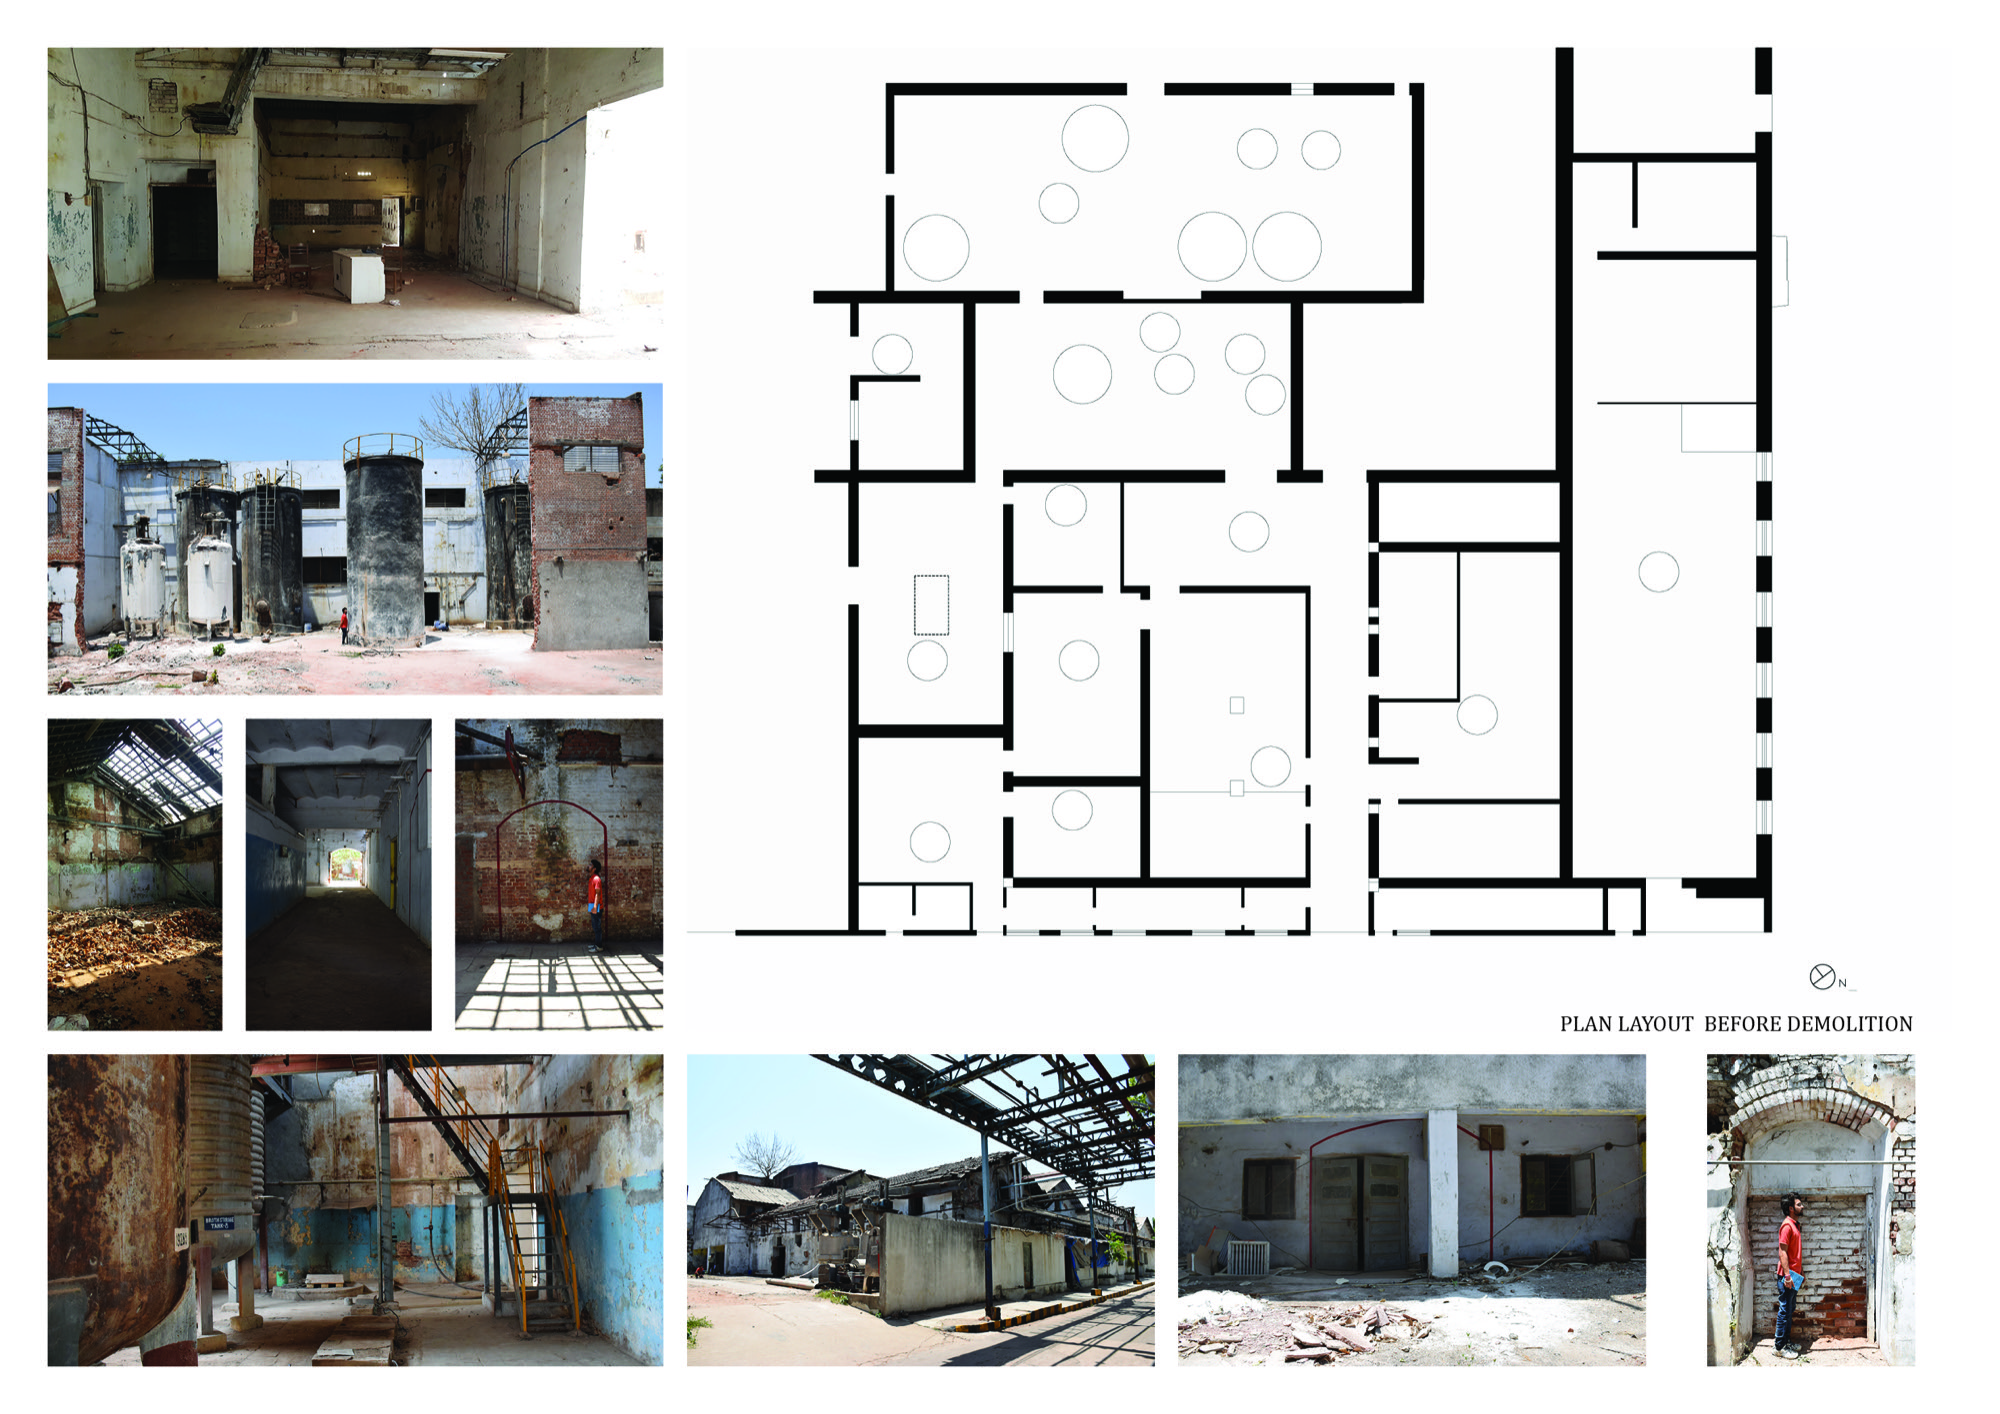 Alembic Industrial Heritage and redevelopment at Vadodara, by Karan Grover and Associates 4